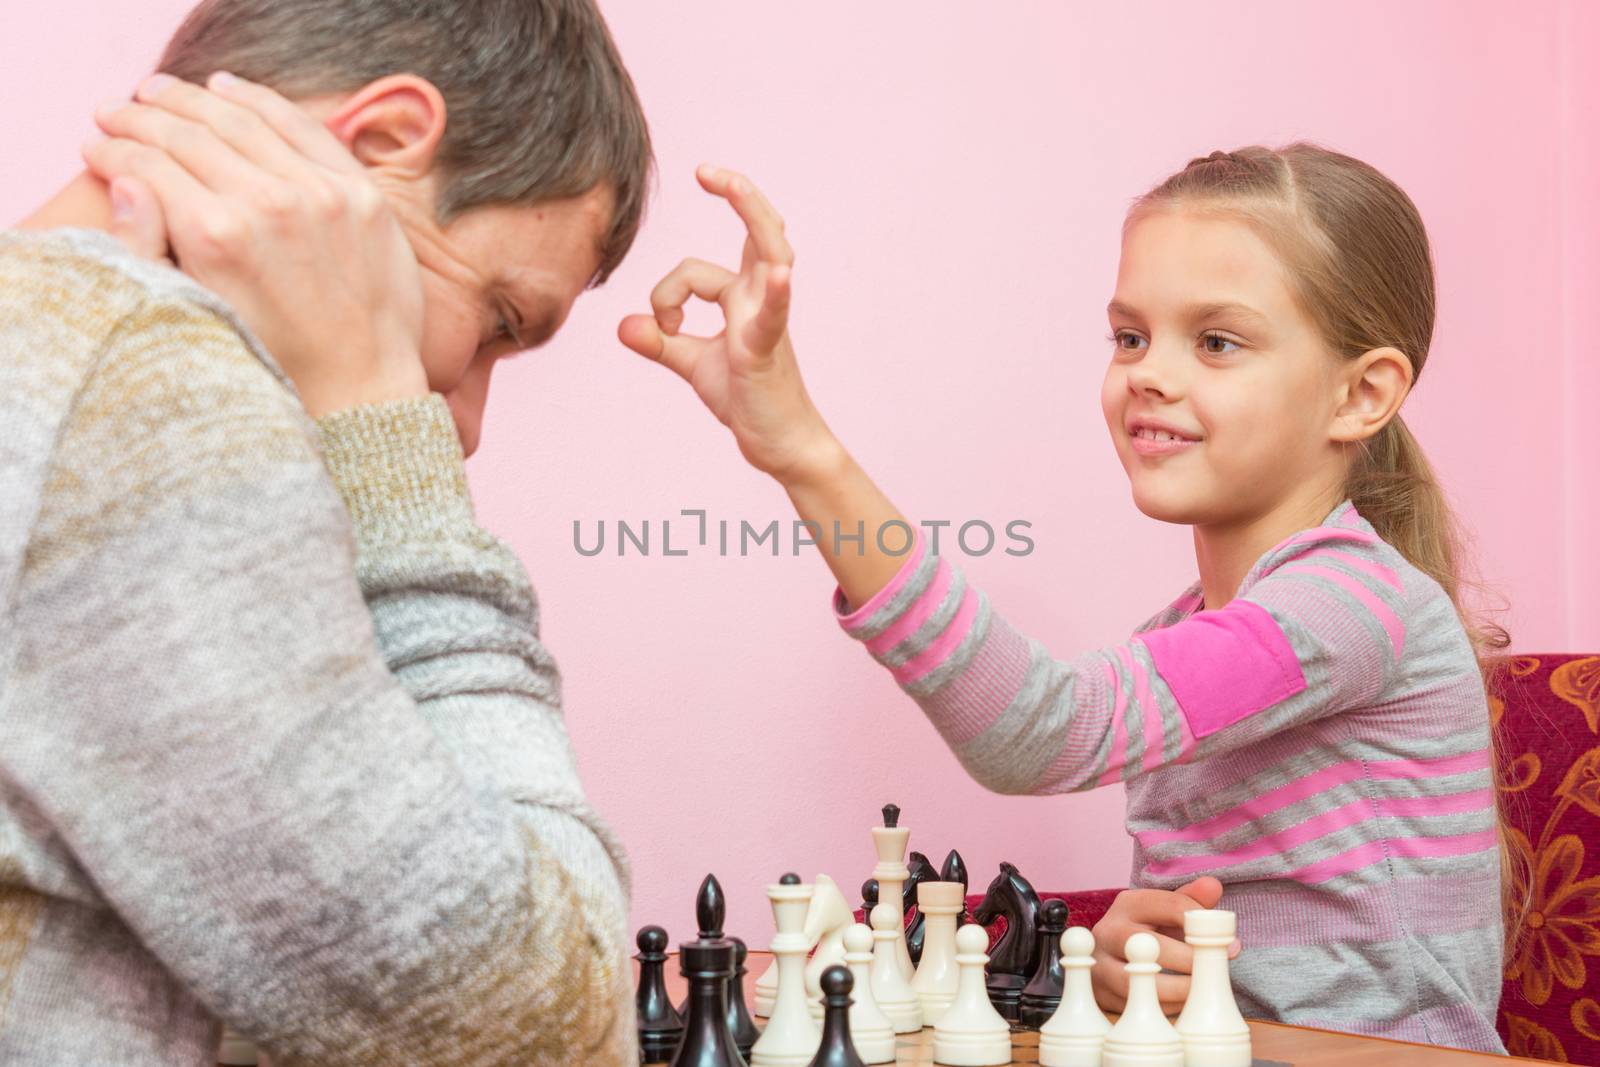 My daughter has a finger on the pope's head, who lost a game of chess by Madhourse